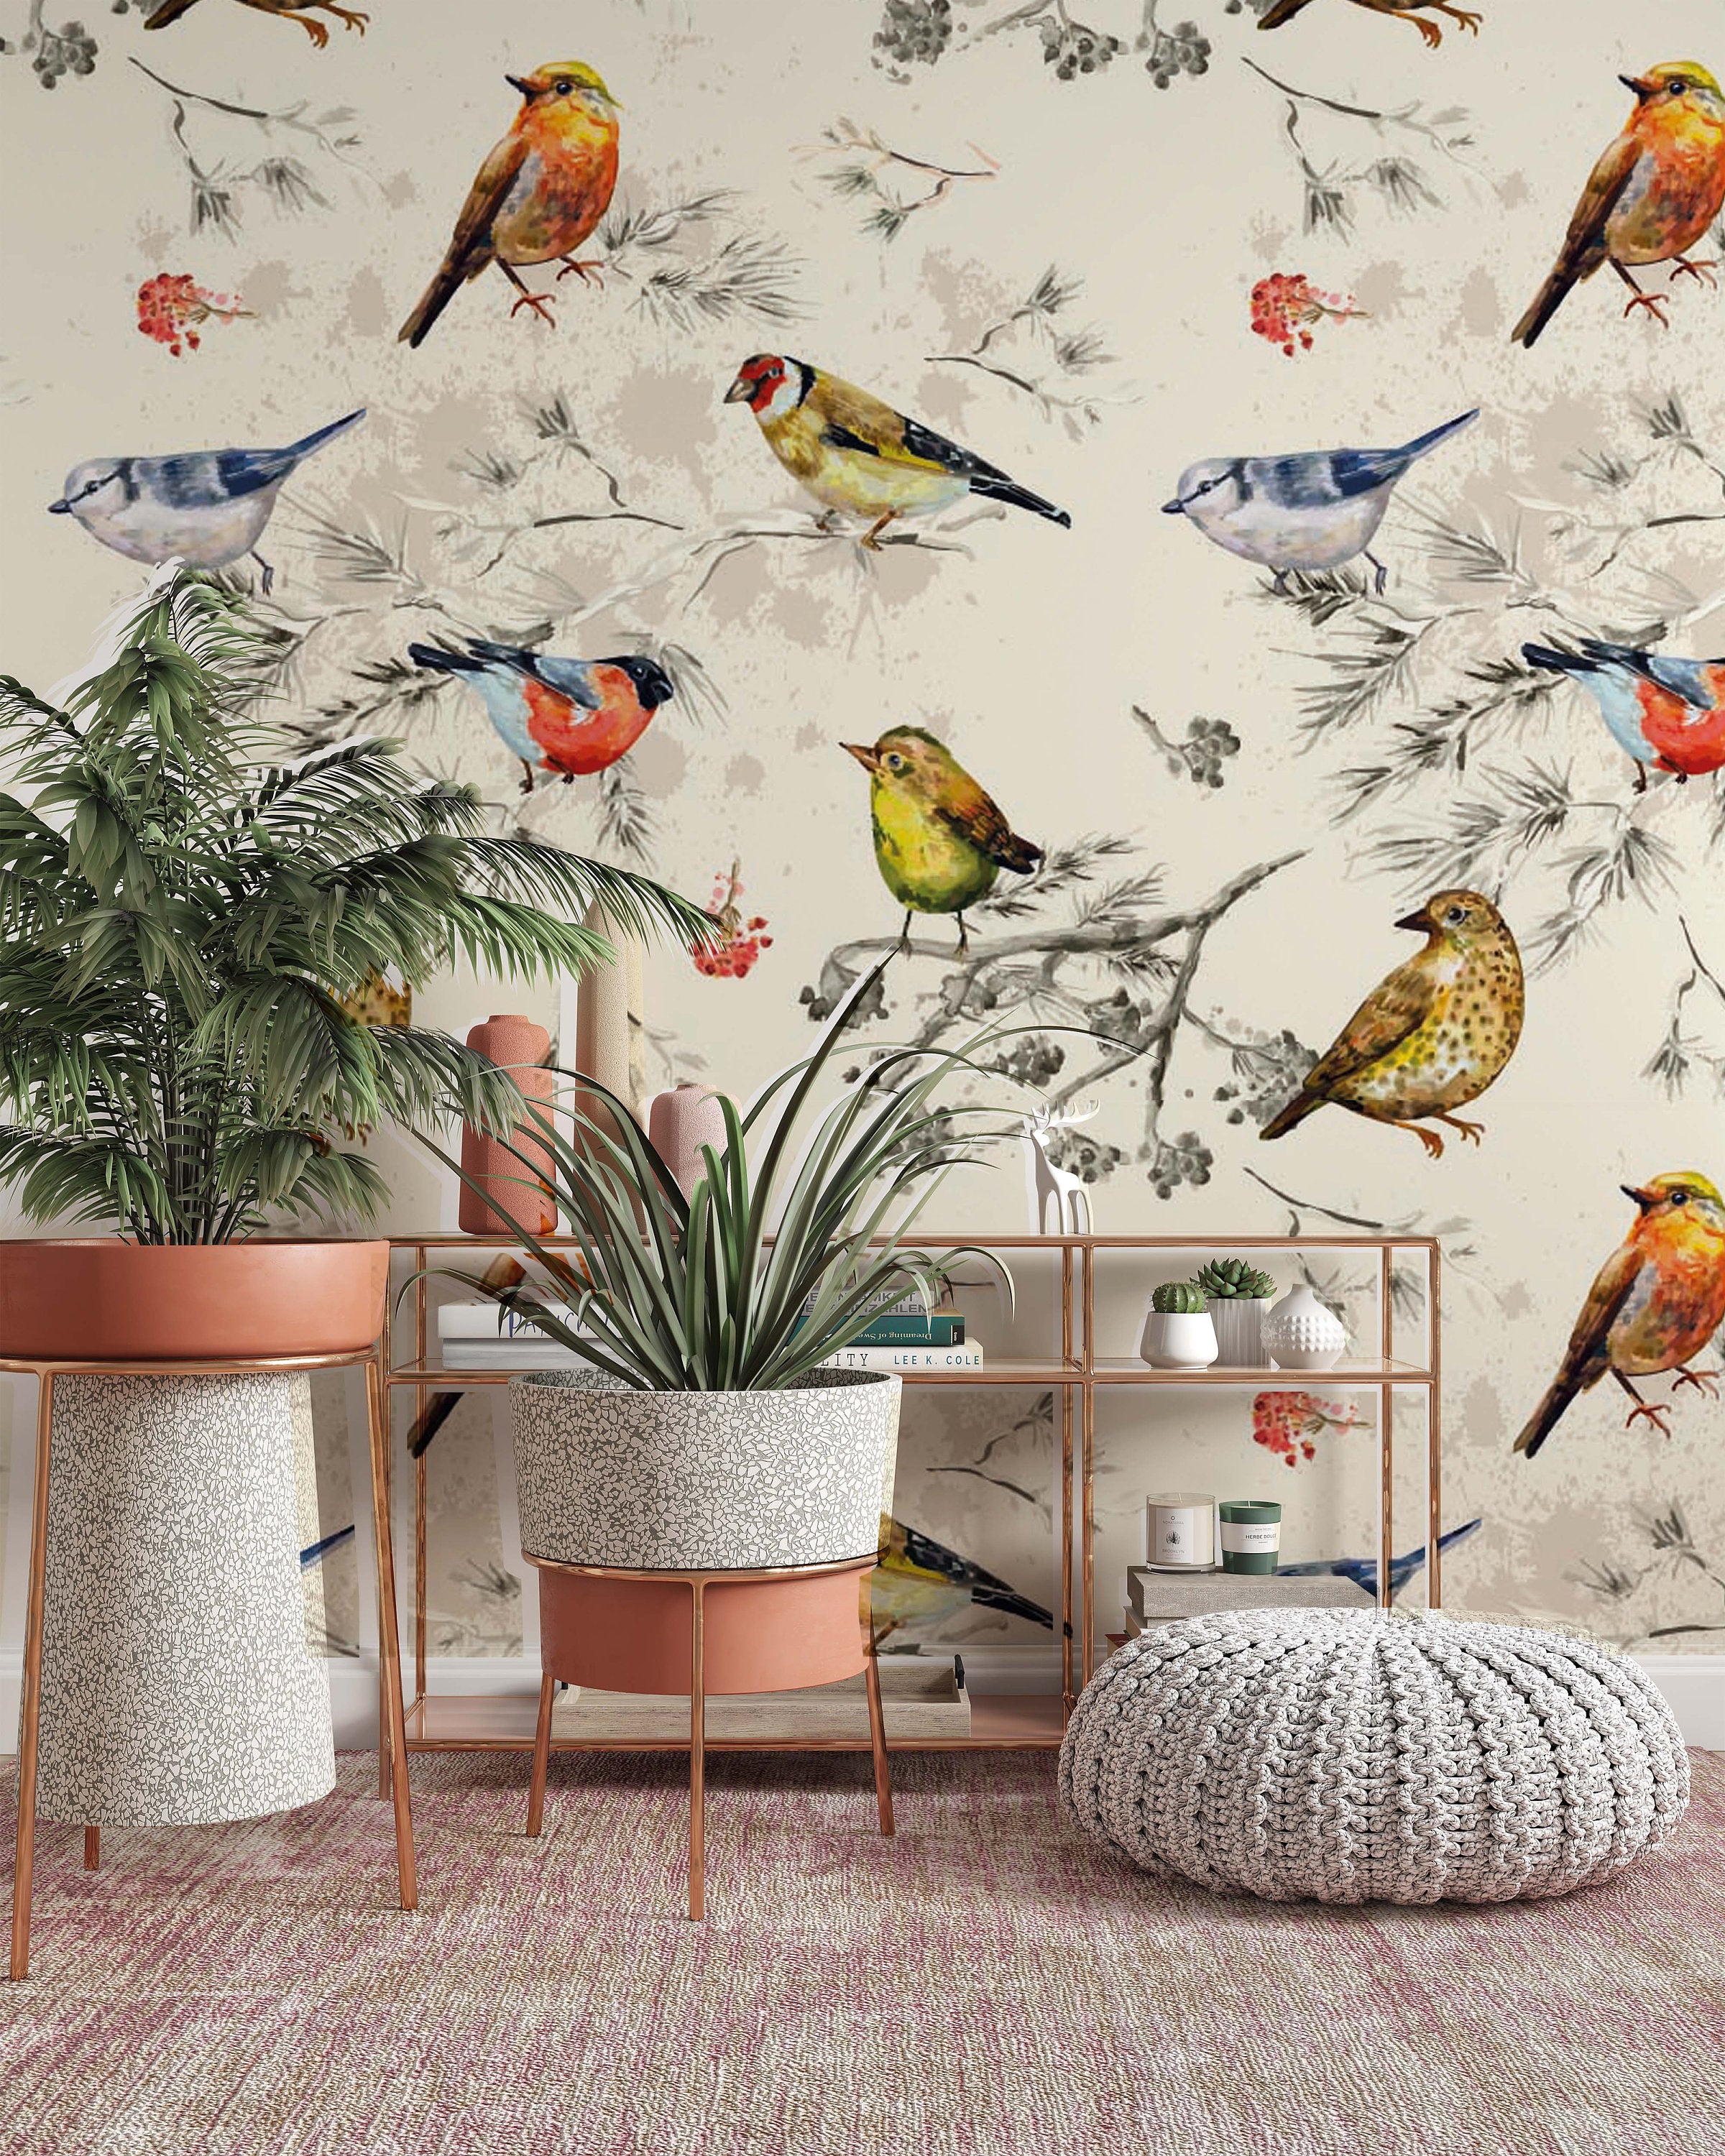 Vintage Texture Colorful Little Birds Watercolor Wallpaper Self Adhesive Peel and Stick Wall Sticker Wall Decoration Scandinavian Removable